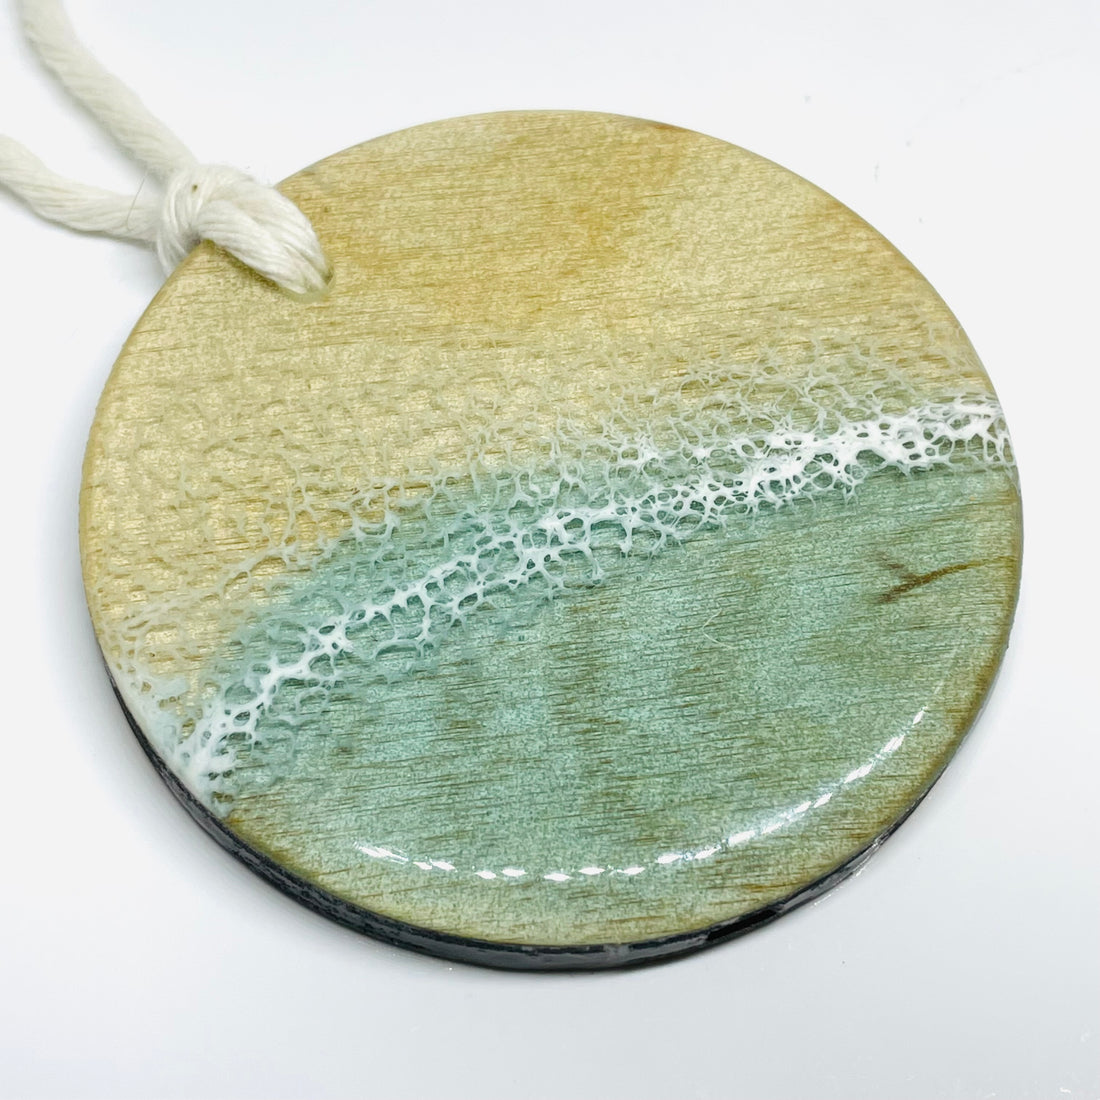 handmade jewelry, Minnesota local wood and resin artist. Ocean waves, sea foam blue and white resin Christmas, holiday ornament